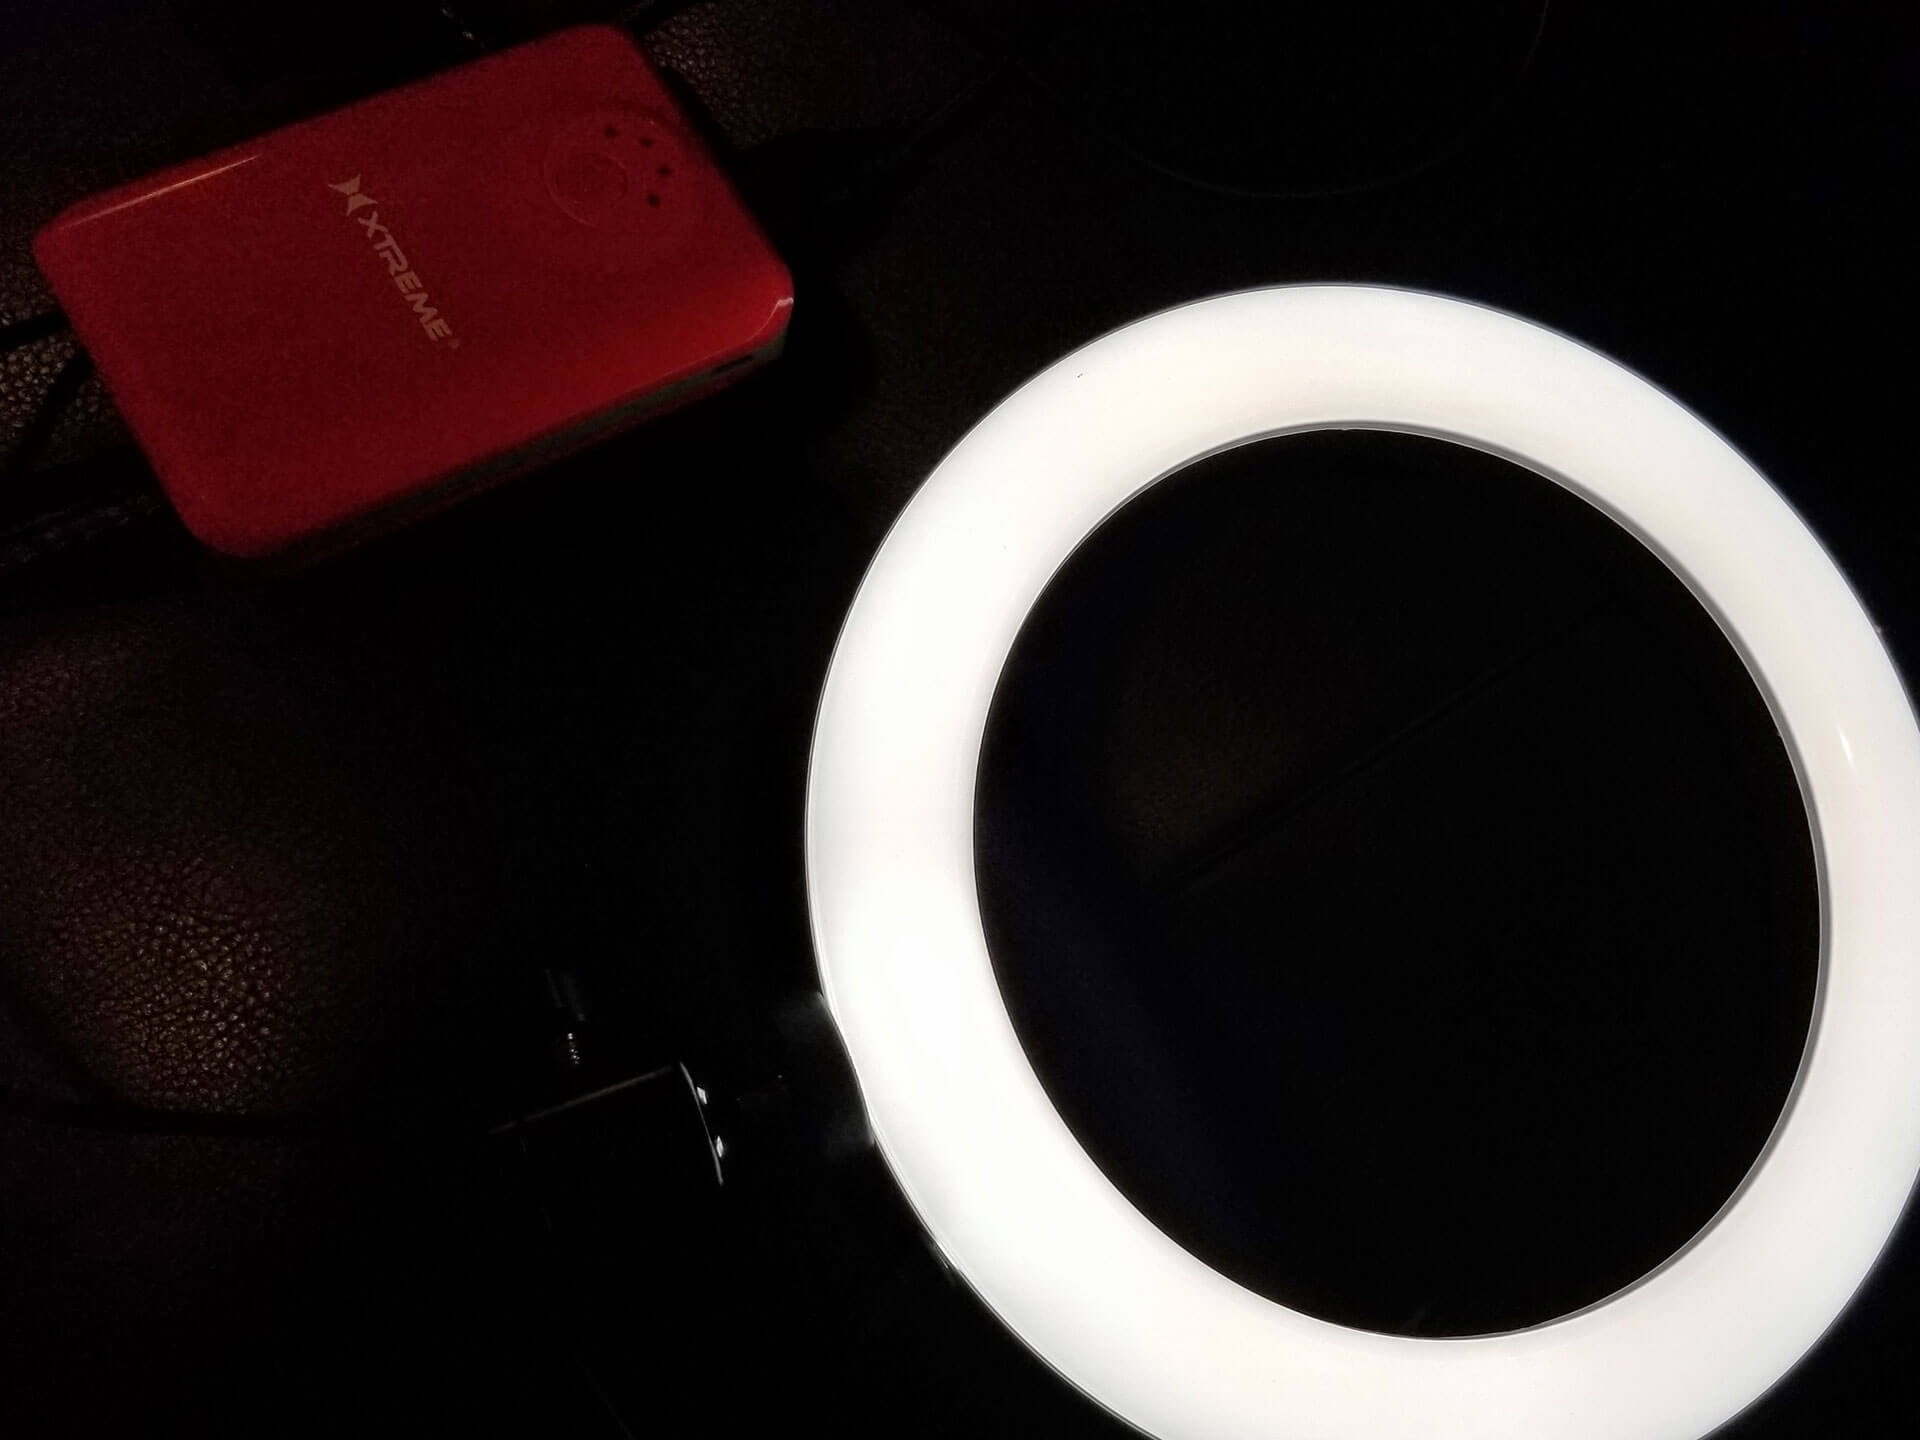 Brightly-illuminated ring light powered by a USB battery pack